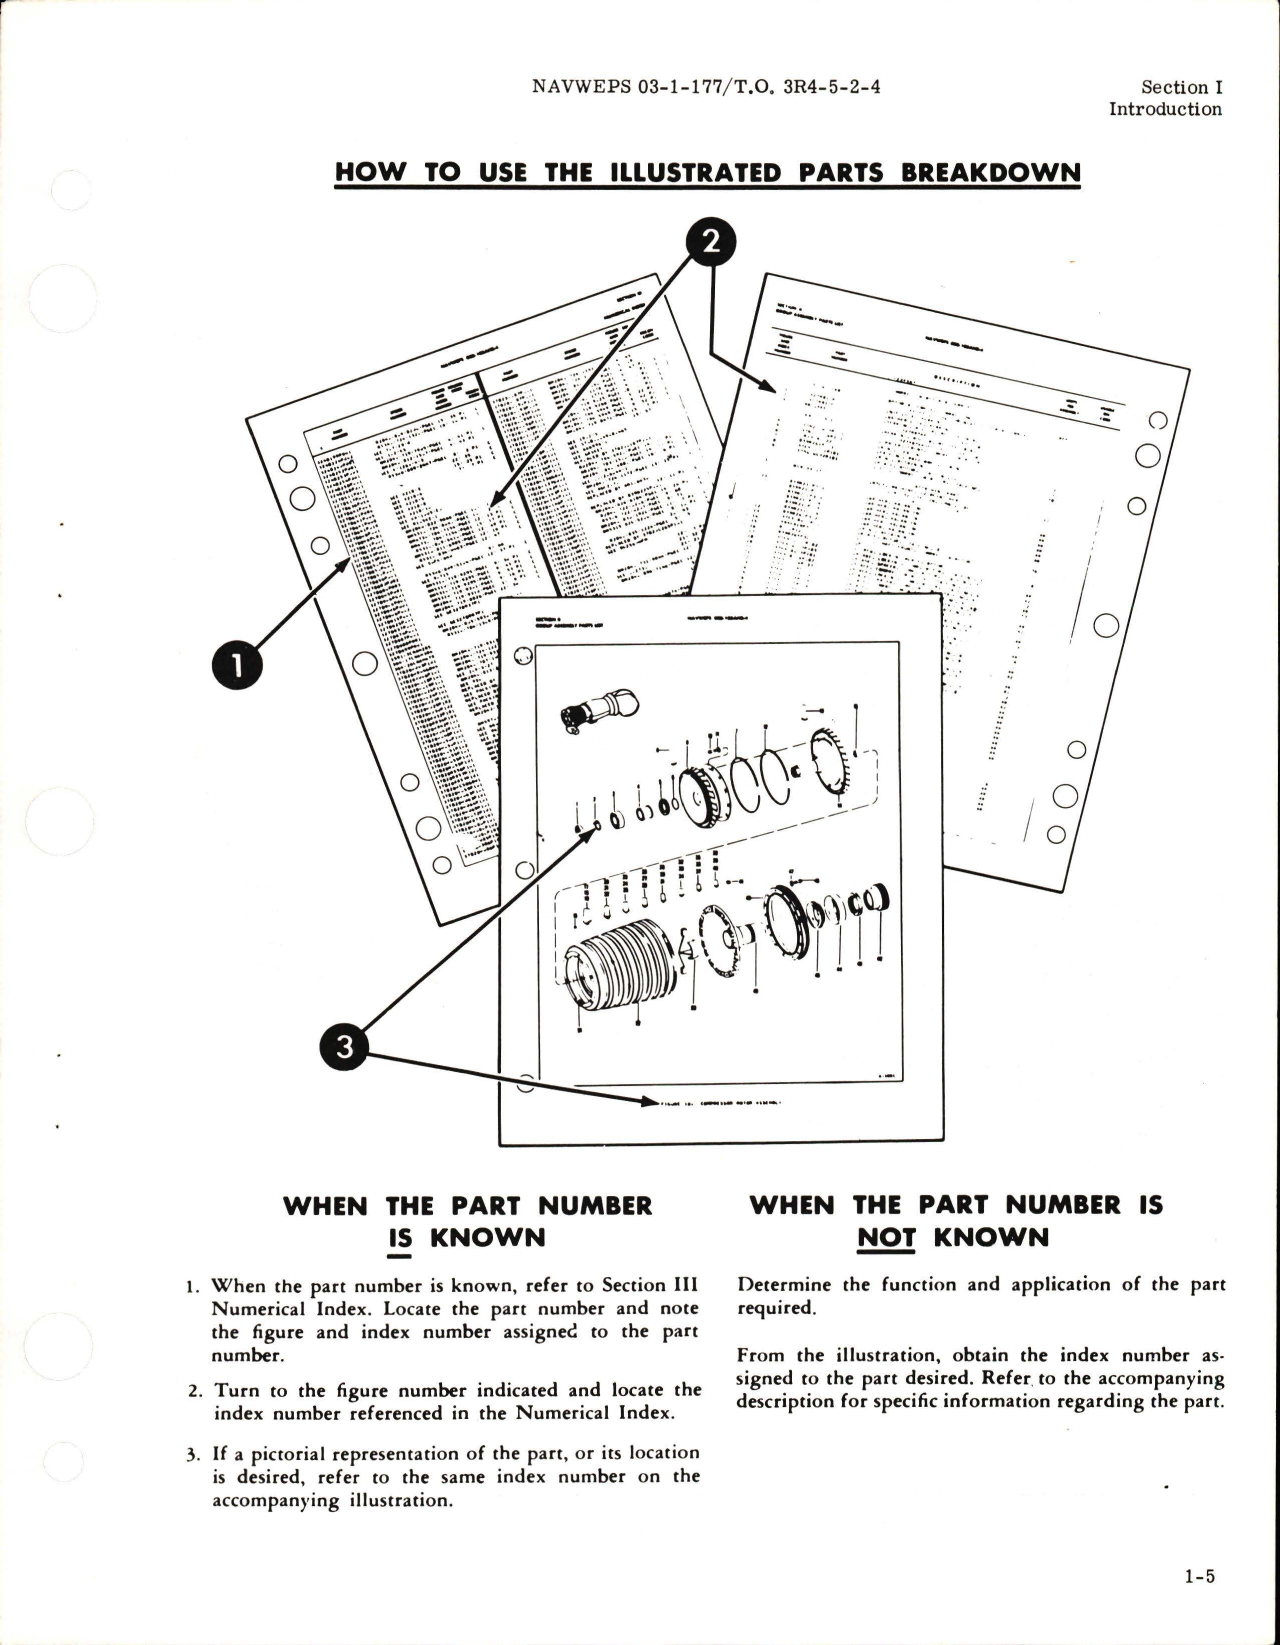 Sample page 9 from AirCorps Library document: Illustrated Parts Breakdown for Speed Decreaser Gear and Associated Parts - Parts 37R600175G001, 37R600175G005, and 37R600175G009 